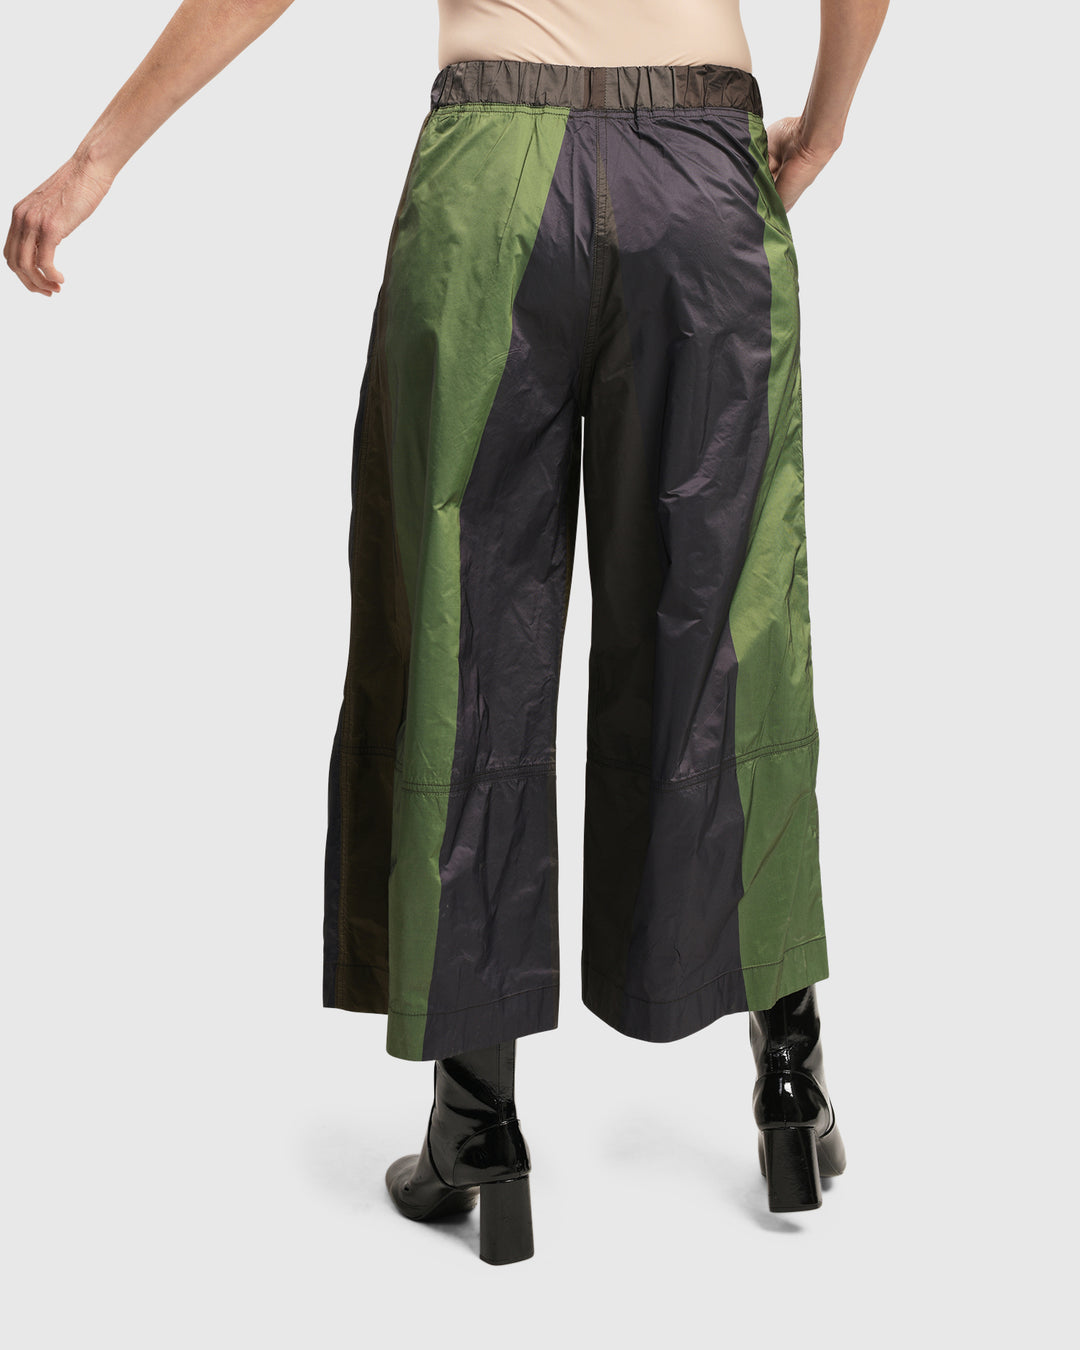 The back view of a woman wearing ALEMBIKA's forest-colored woven Alfresco Market Pants with an elastic waistband.